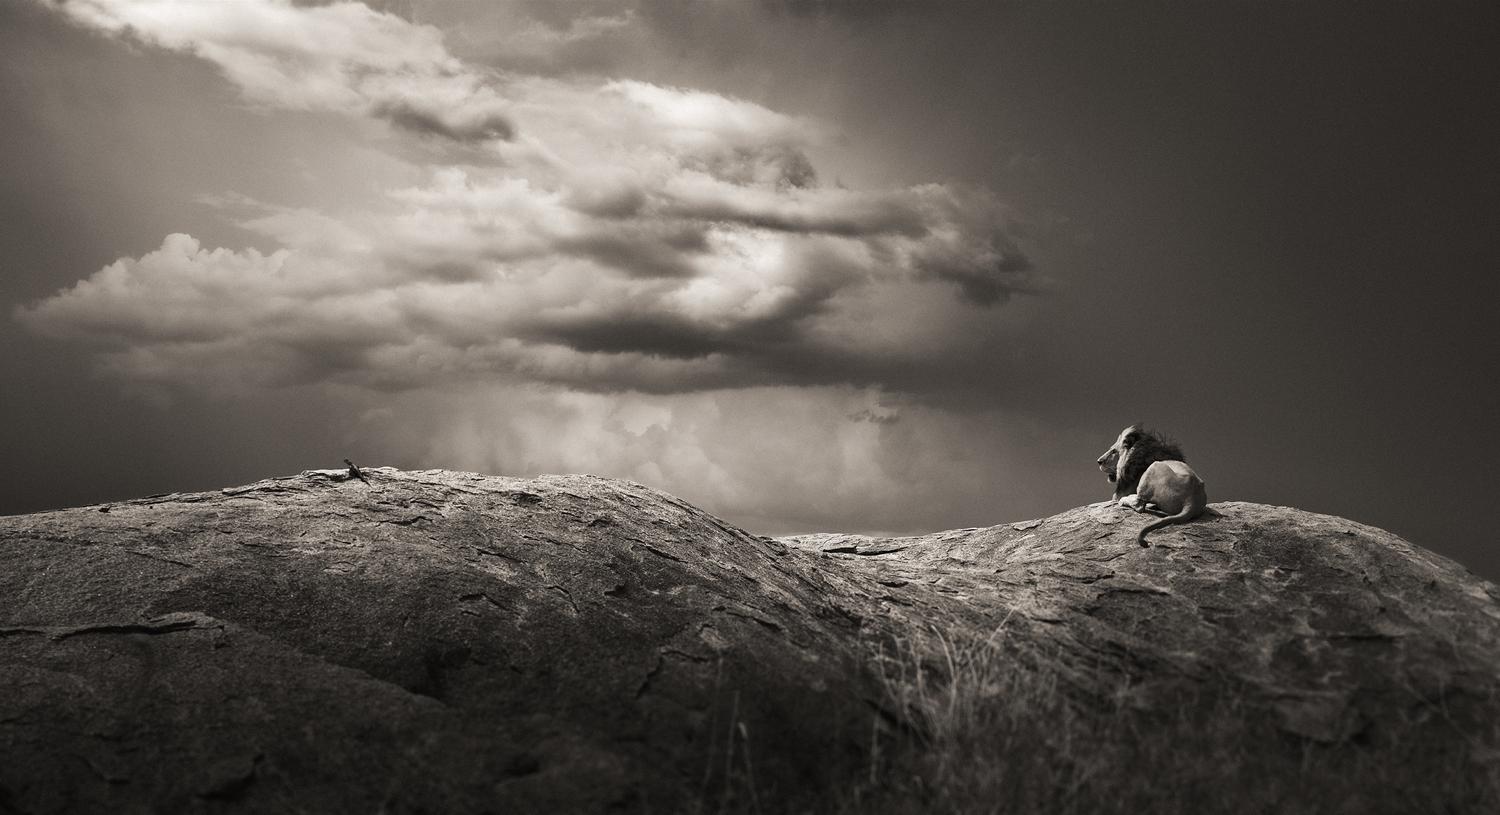 Joachim Schmeisser Landscape Photograph - Remember when II, contemporary, wildlife, black and white photography, Lion